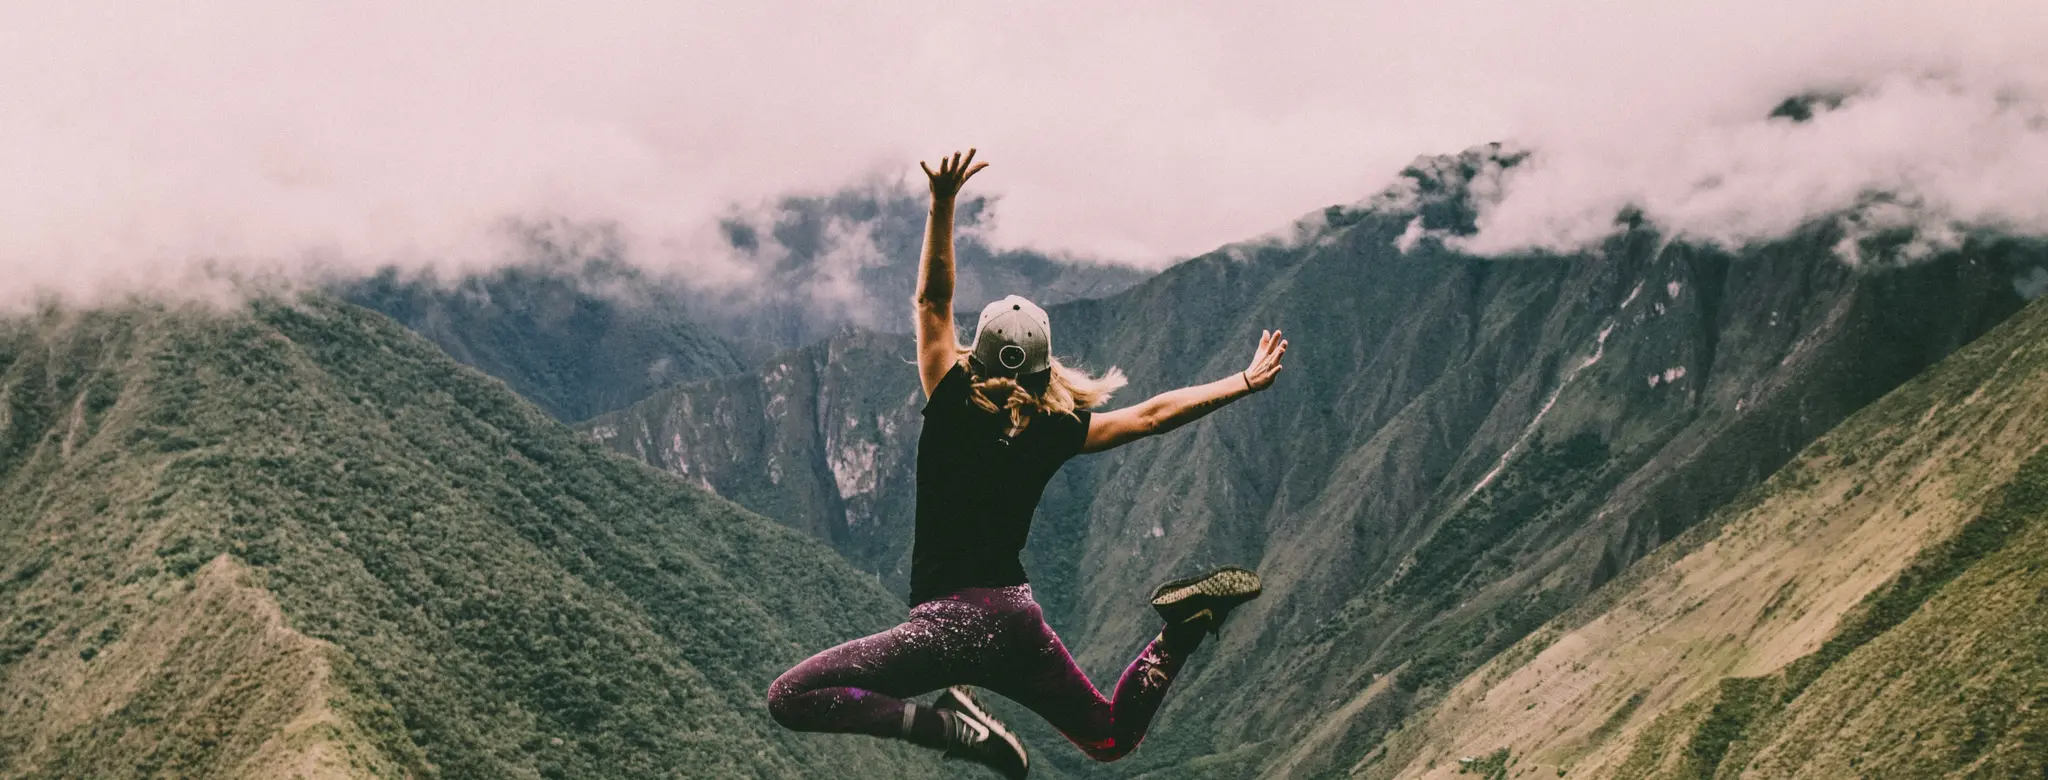 Woman jumping for joy in front of clouds and mountains